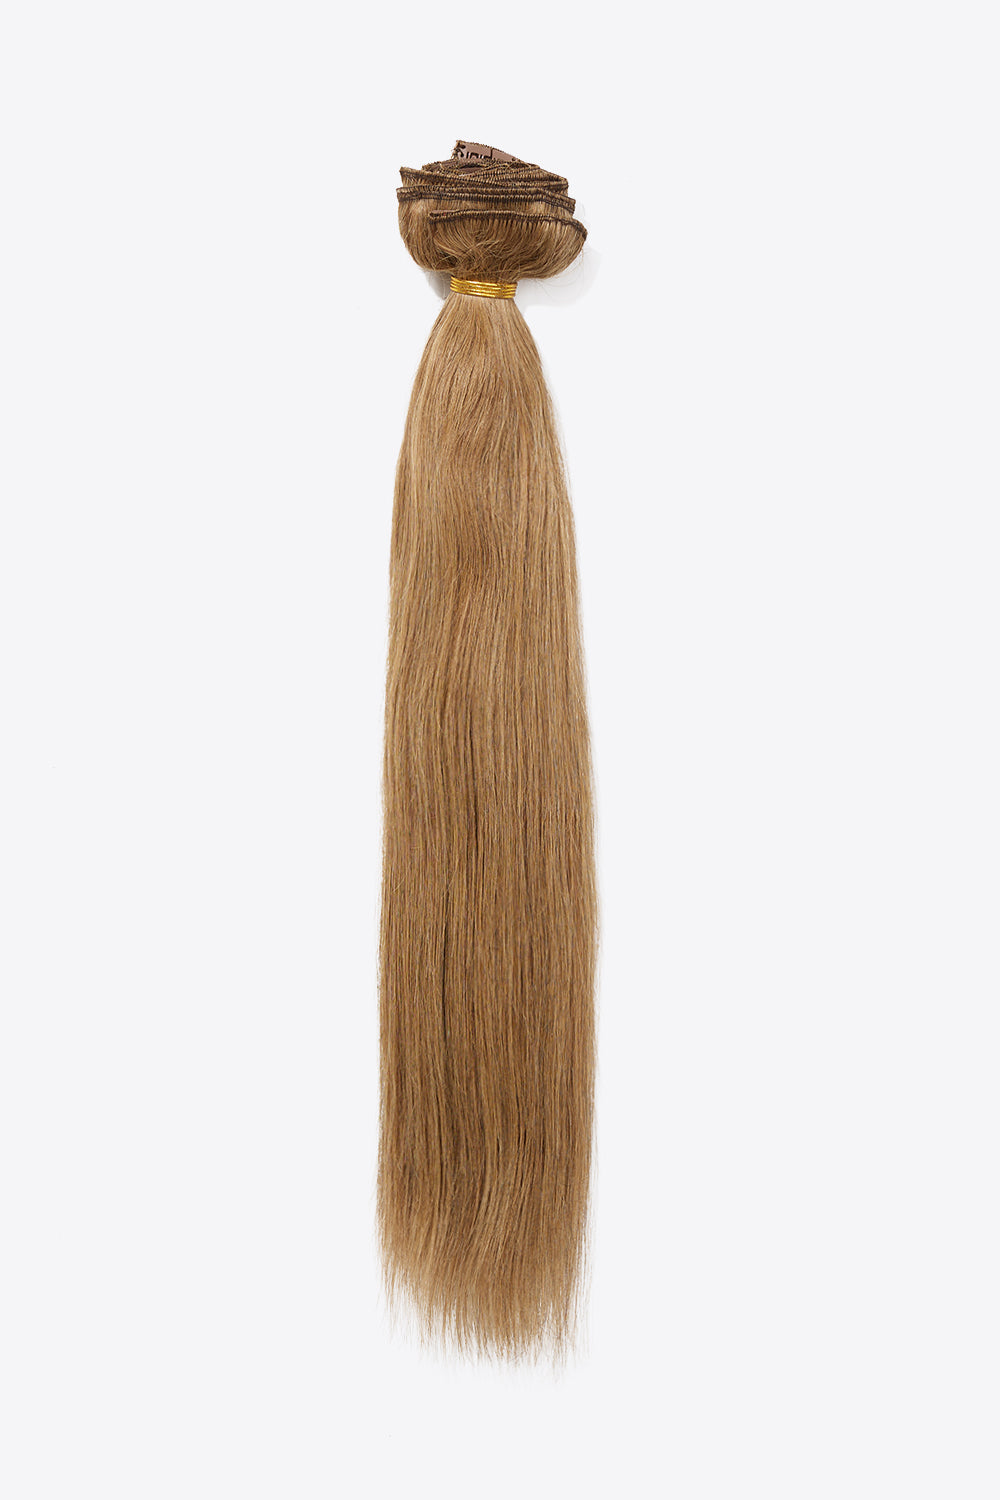 Nr. 10 Natural Straight Clip-in Hair Extensions Human Hair DromedarShop.com Online Boutique